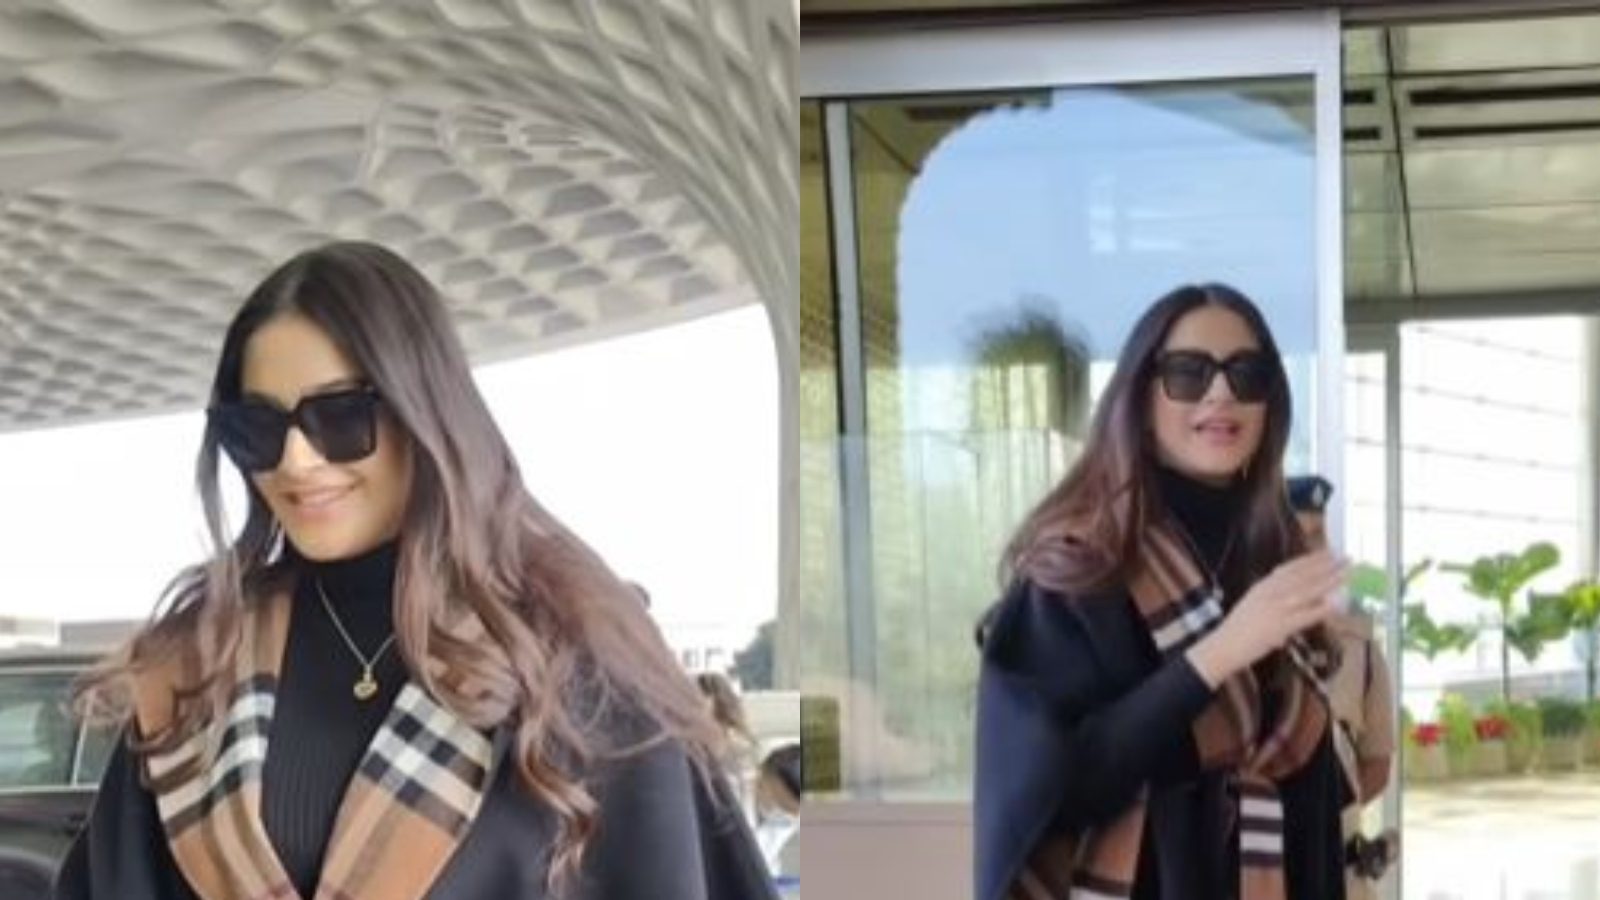 Sonam Kapoor To Anushka Sharma, Airport Fashion Is All About